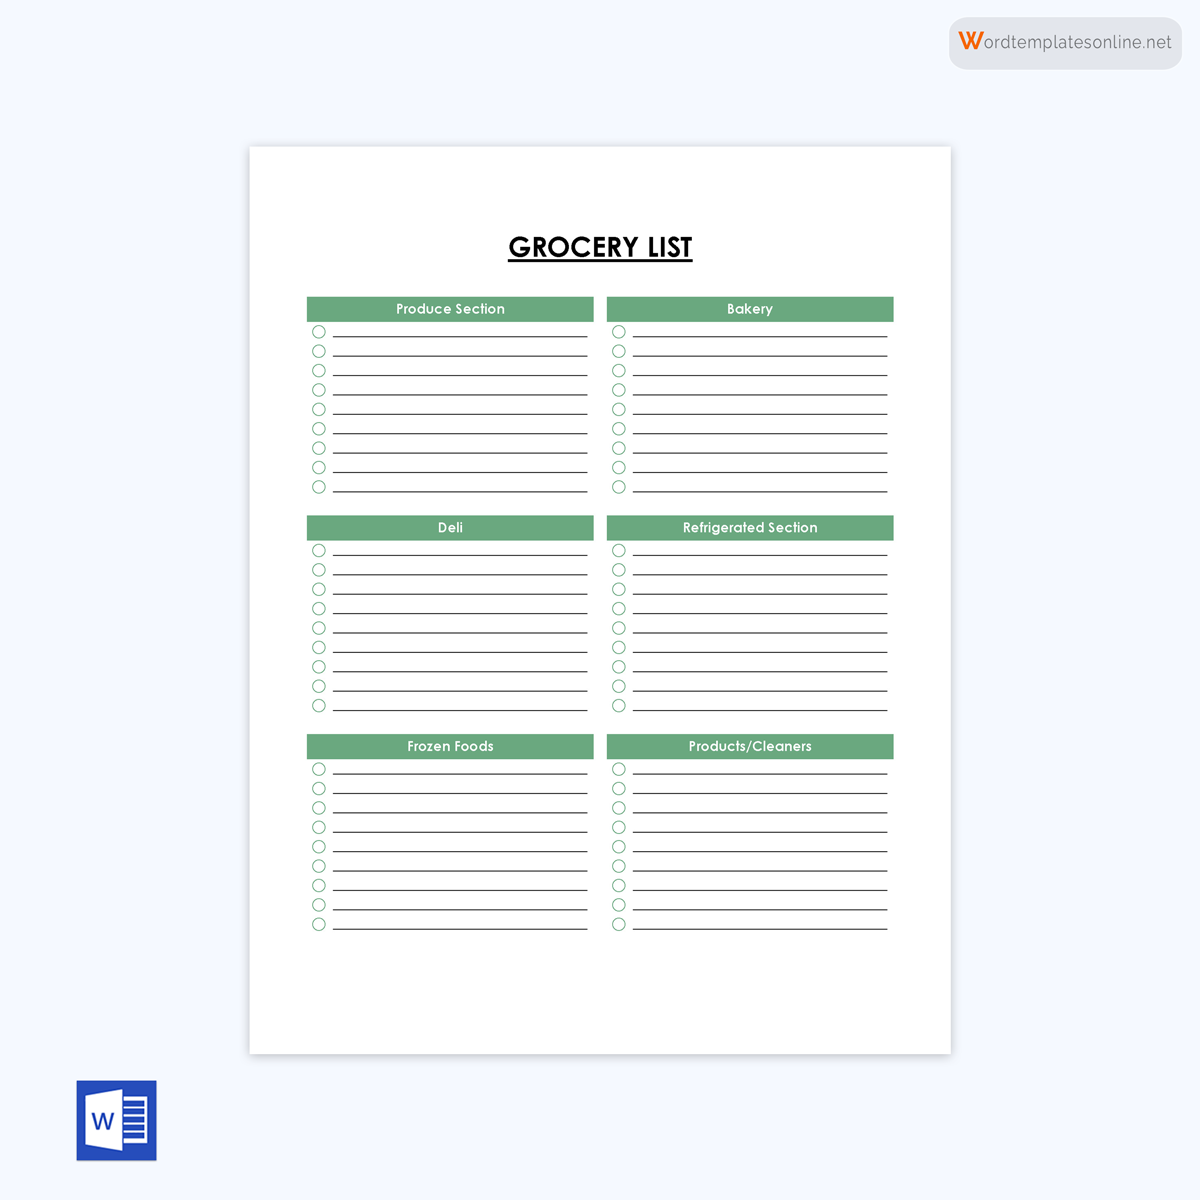 Sample Grocery List Template 02